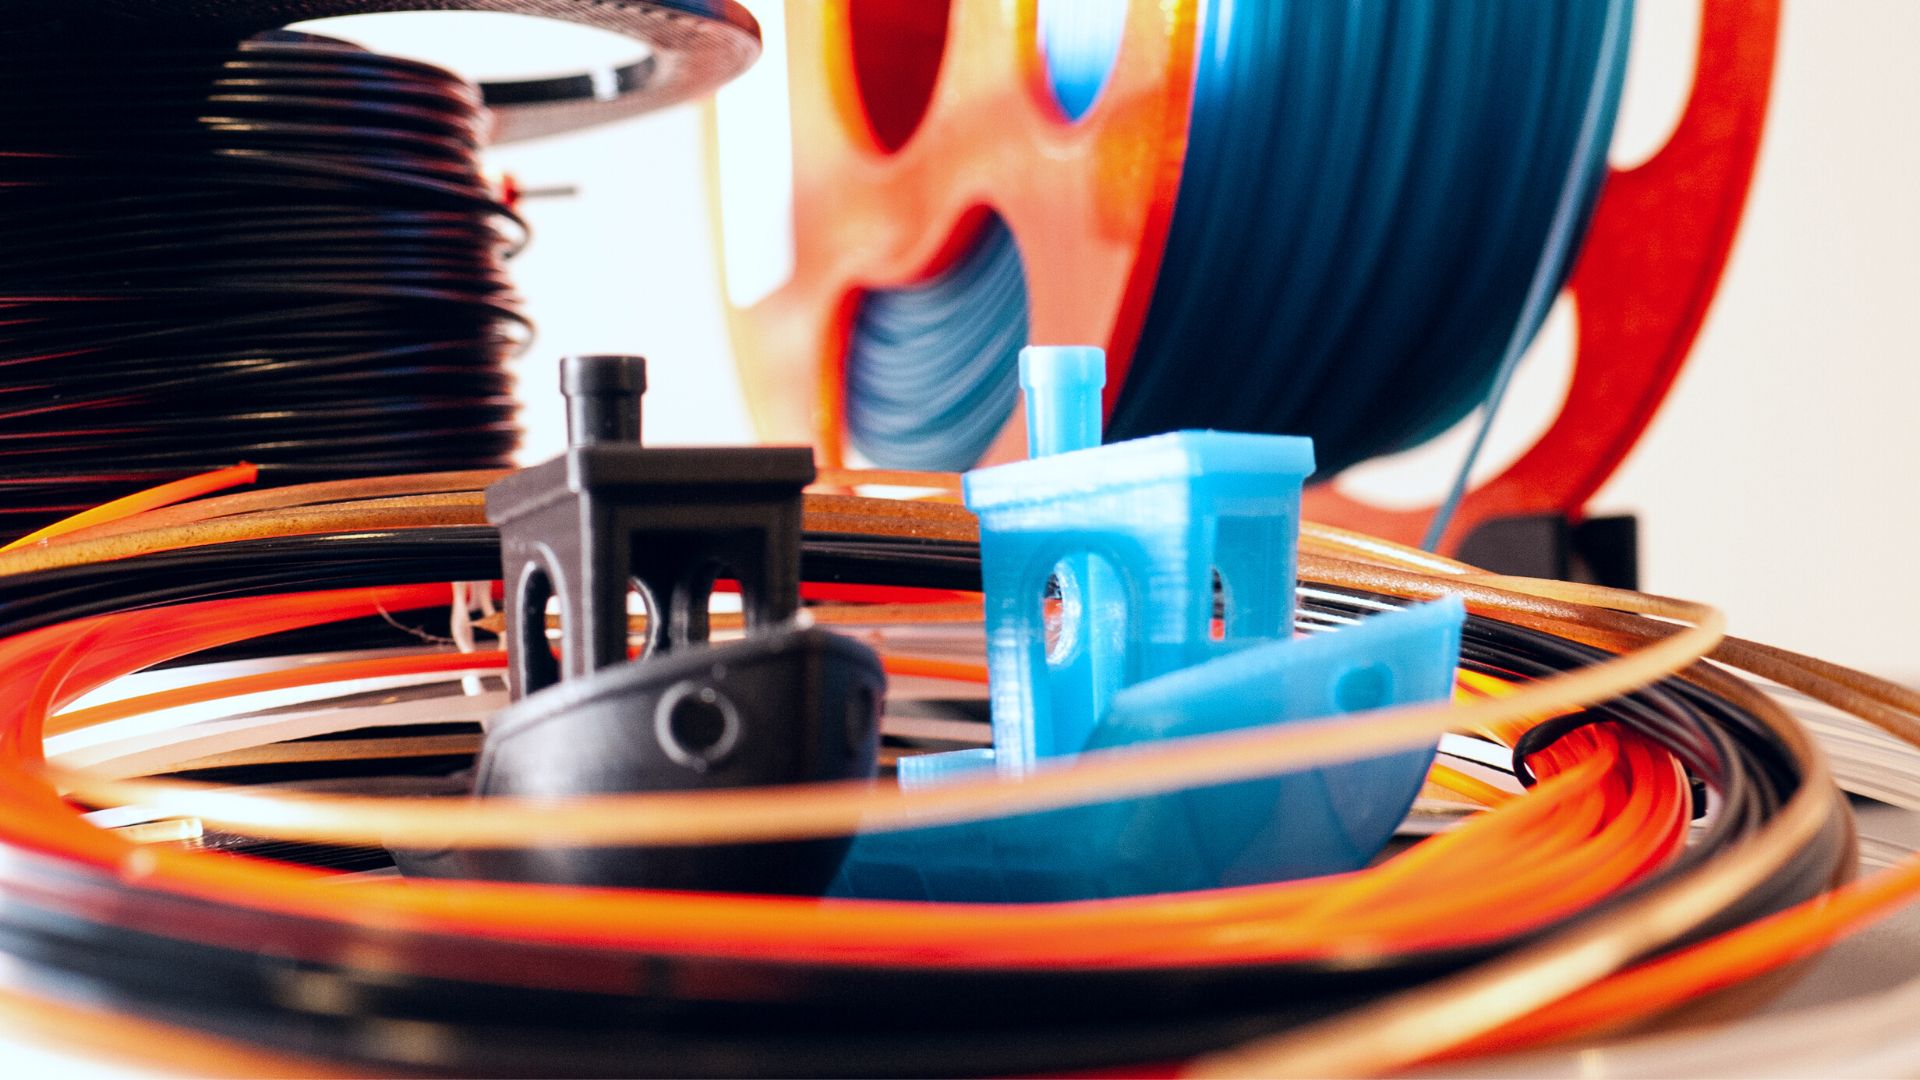 What Can You Make With TPU 3D Printing Filaments?